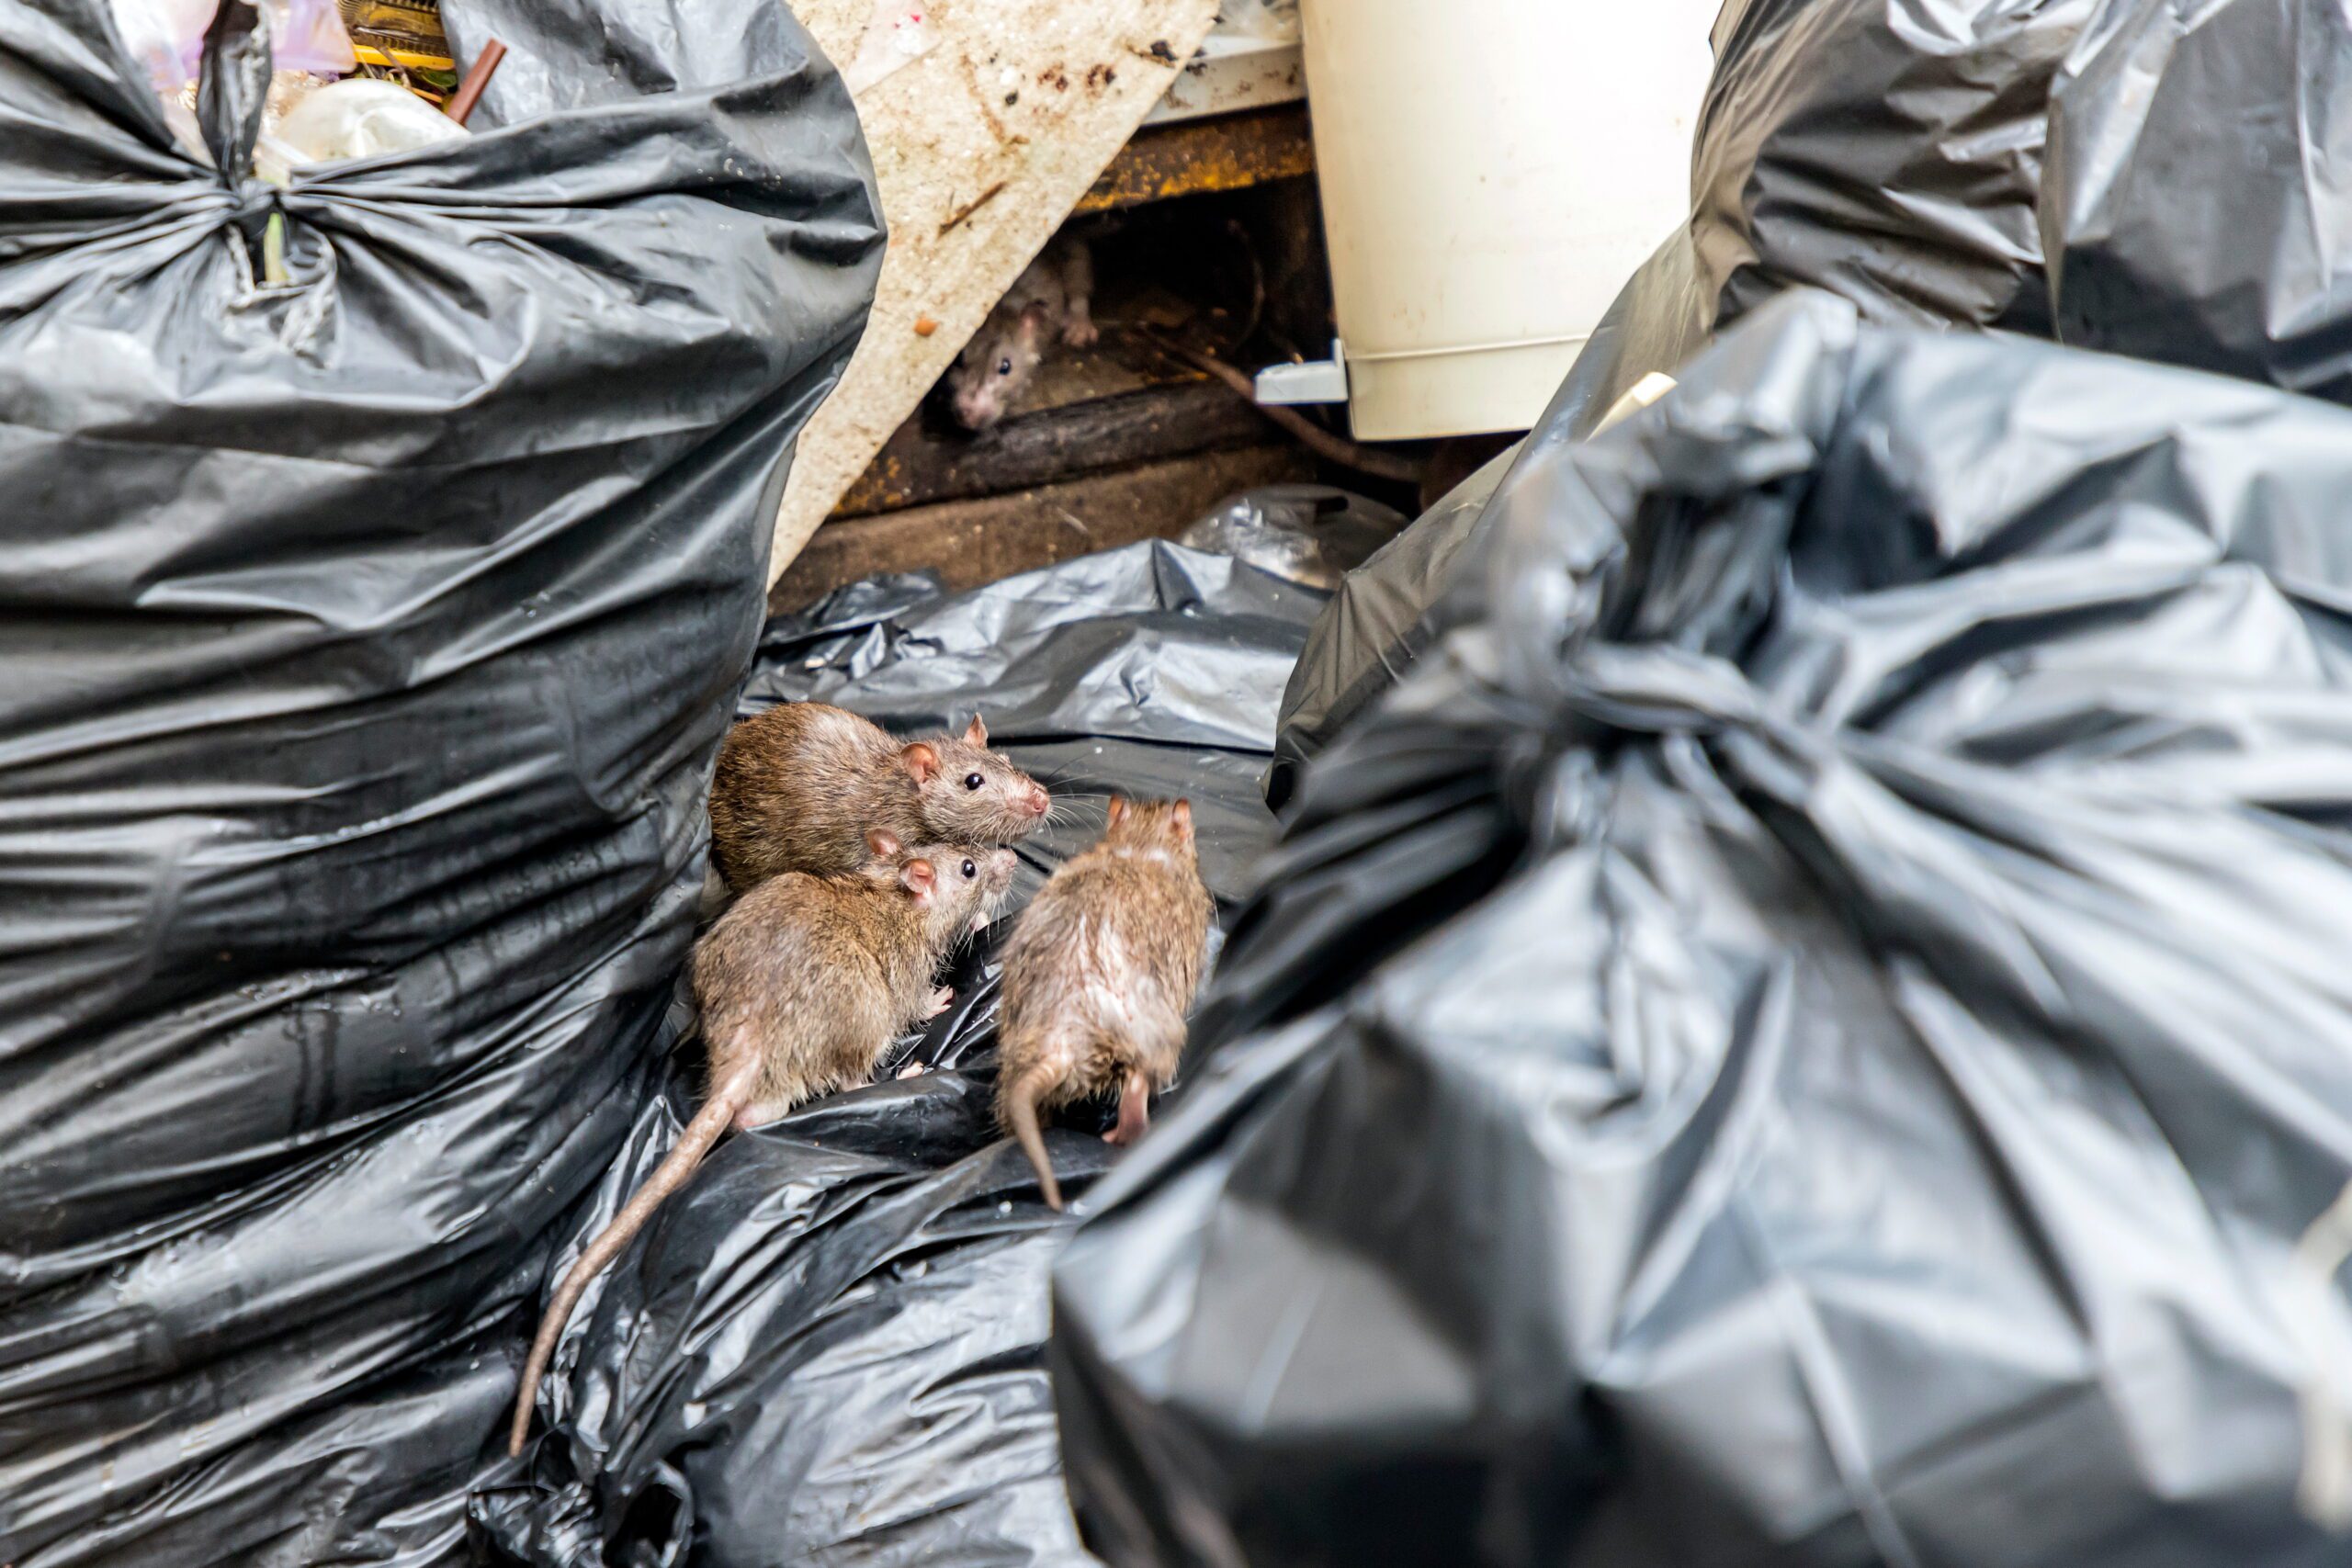 Mice in the garbage